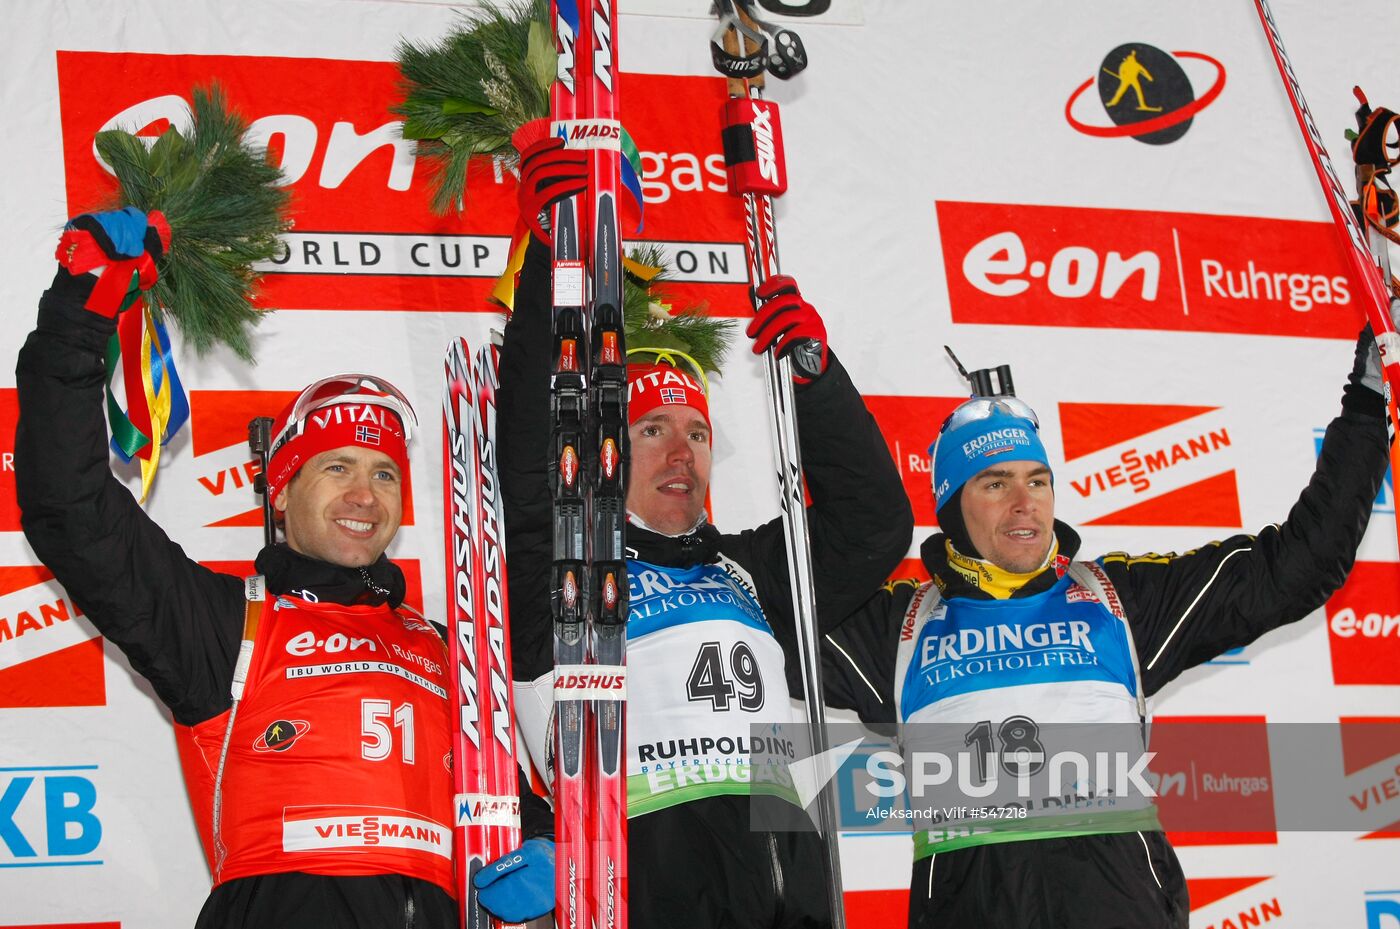 The Fifth stage of the Biathlon World Cup in Germany